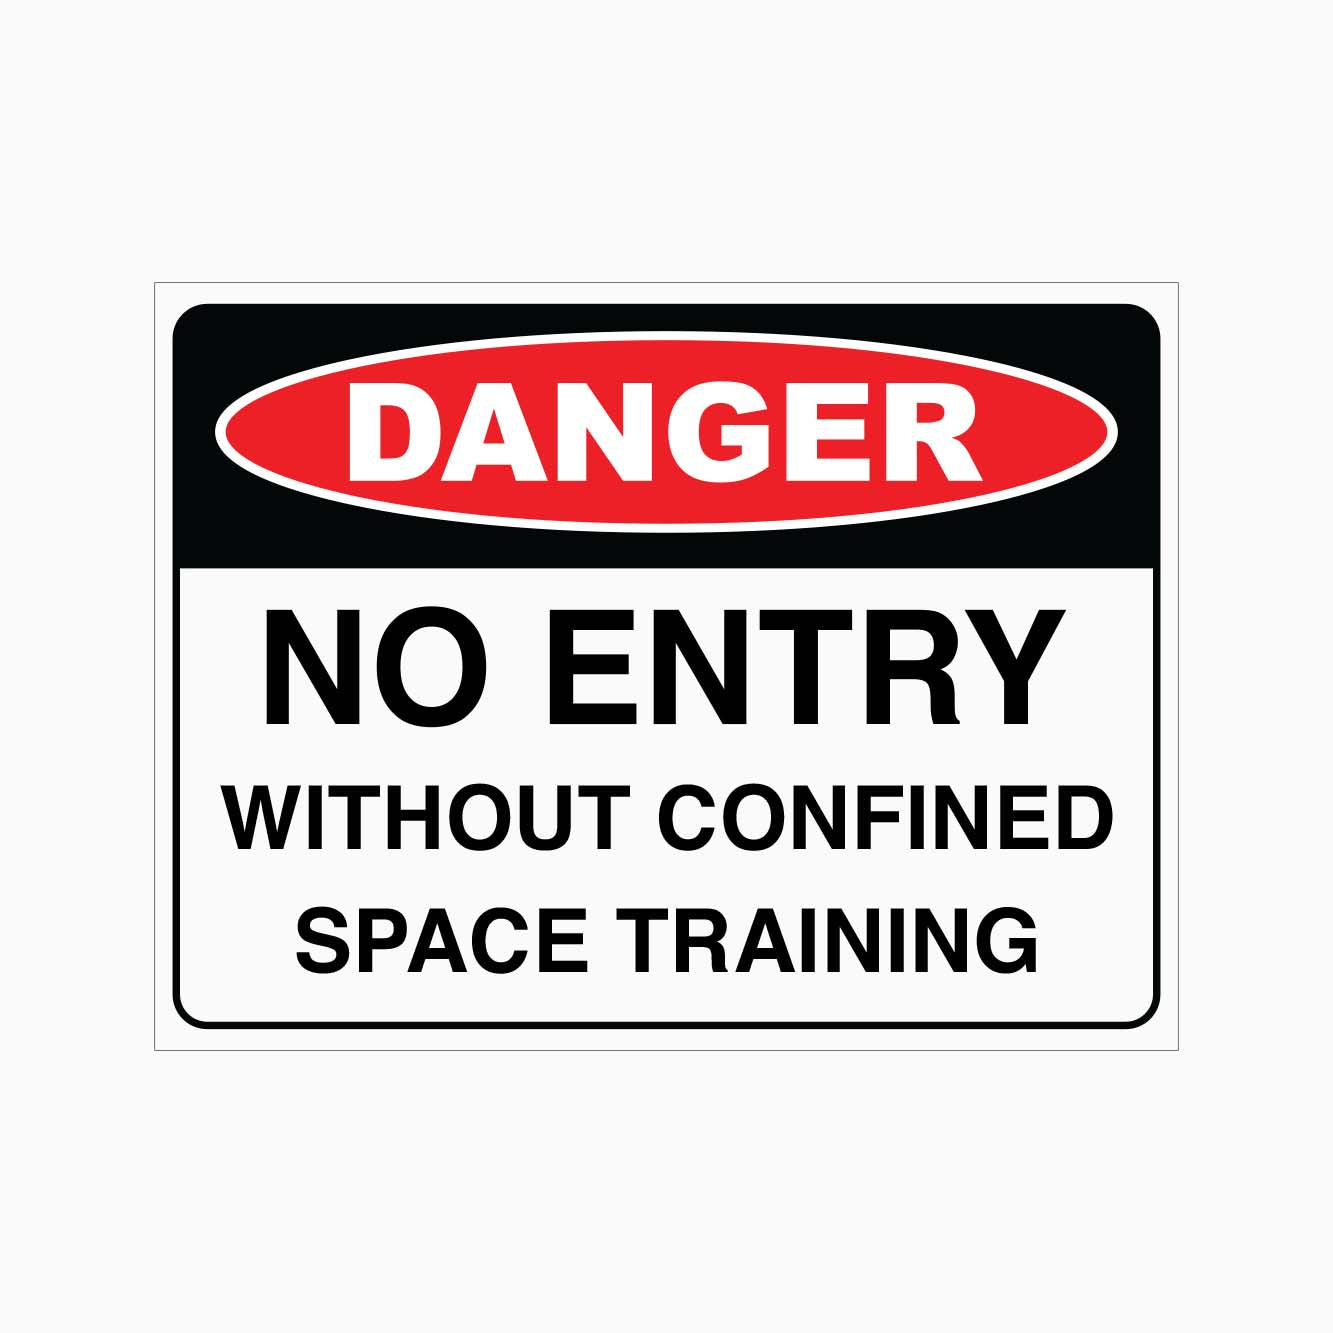 DANGER NO ENTRY WITHOUT CONFINED SPACE TRAINING SIGN - get signs